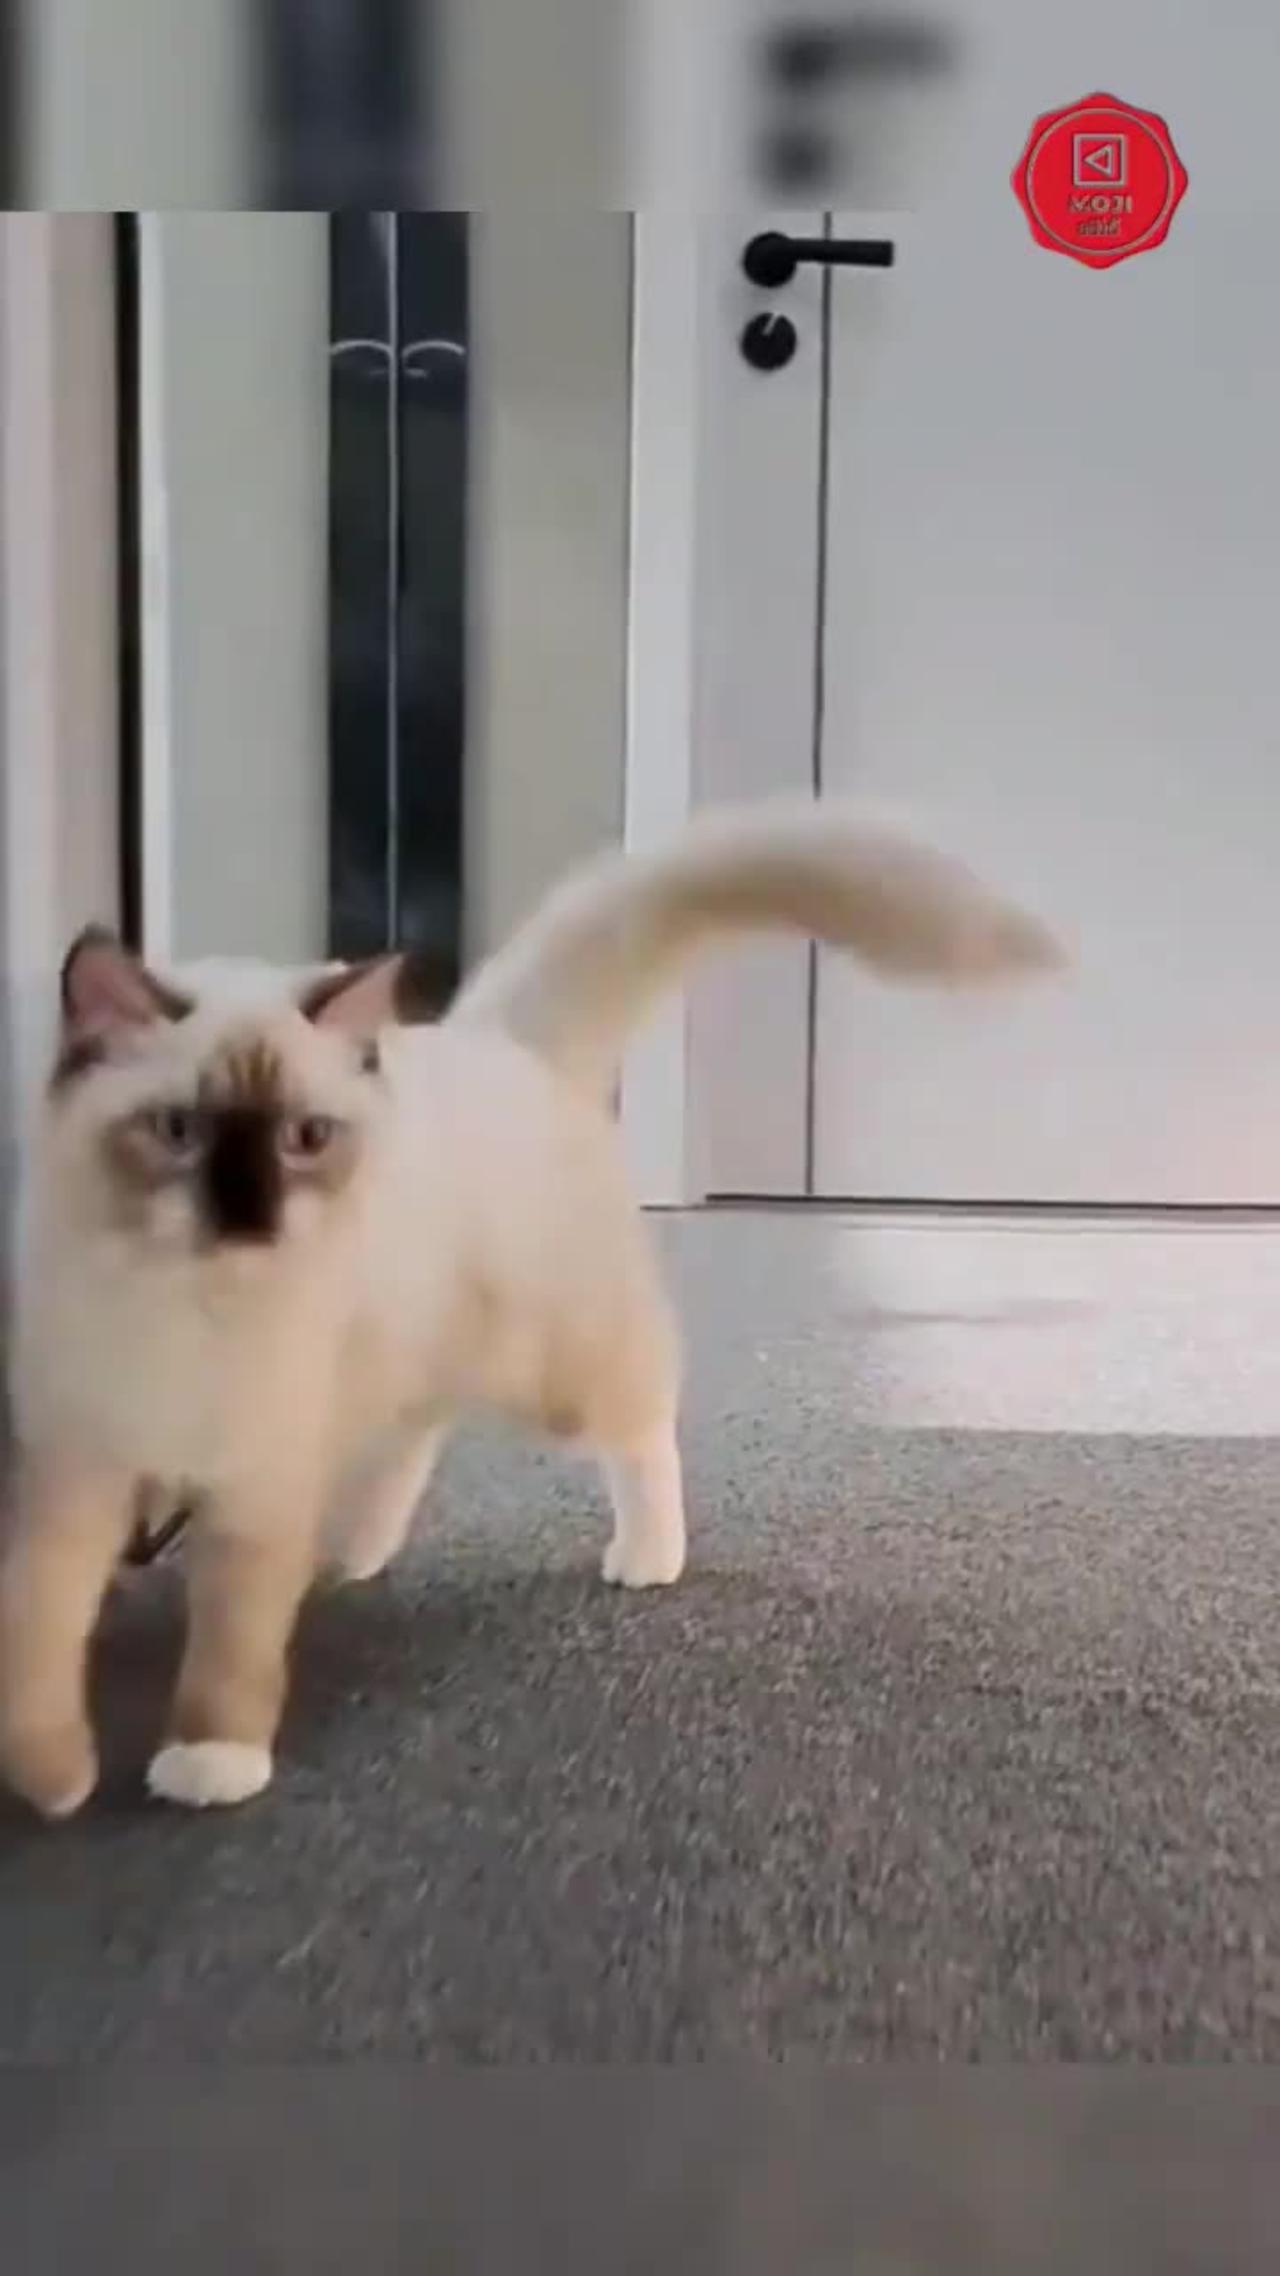 Hiss-terical Cats: The Funniest Videos of Our Furry Friends